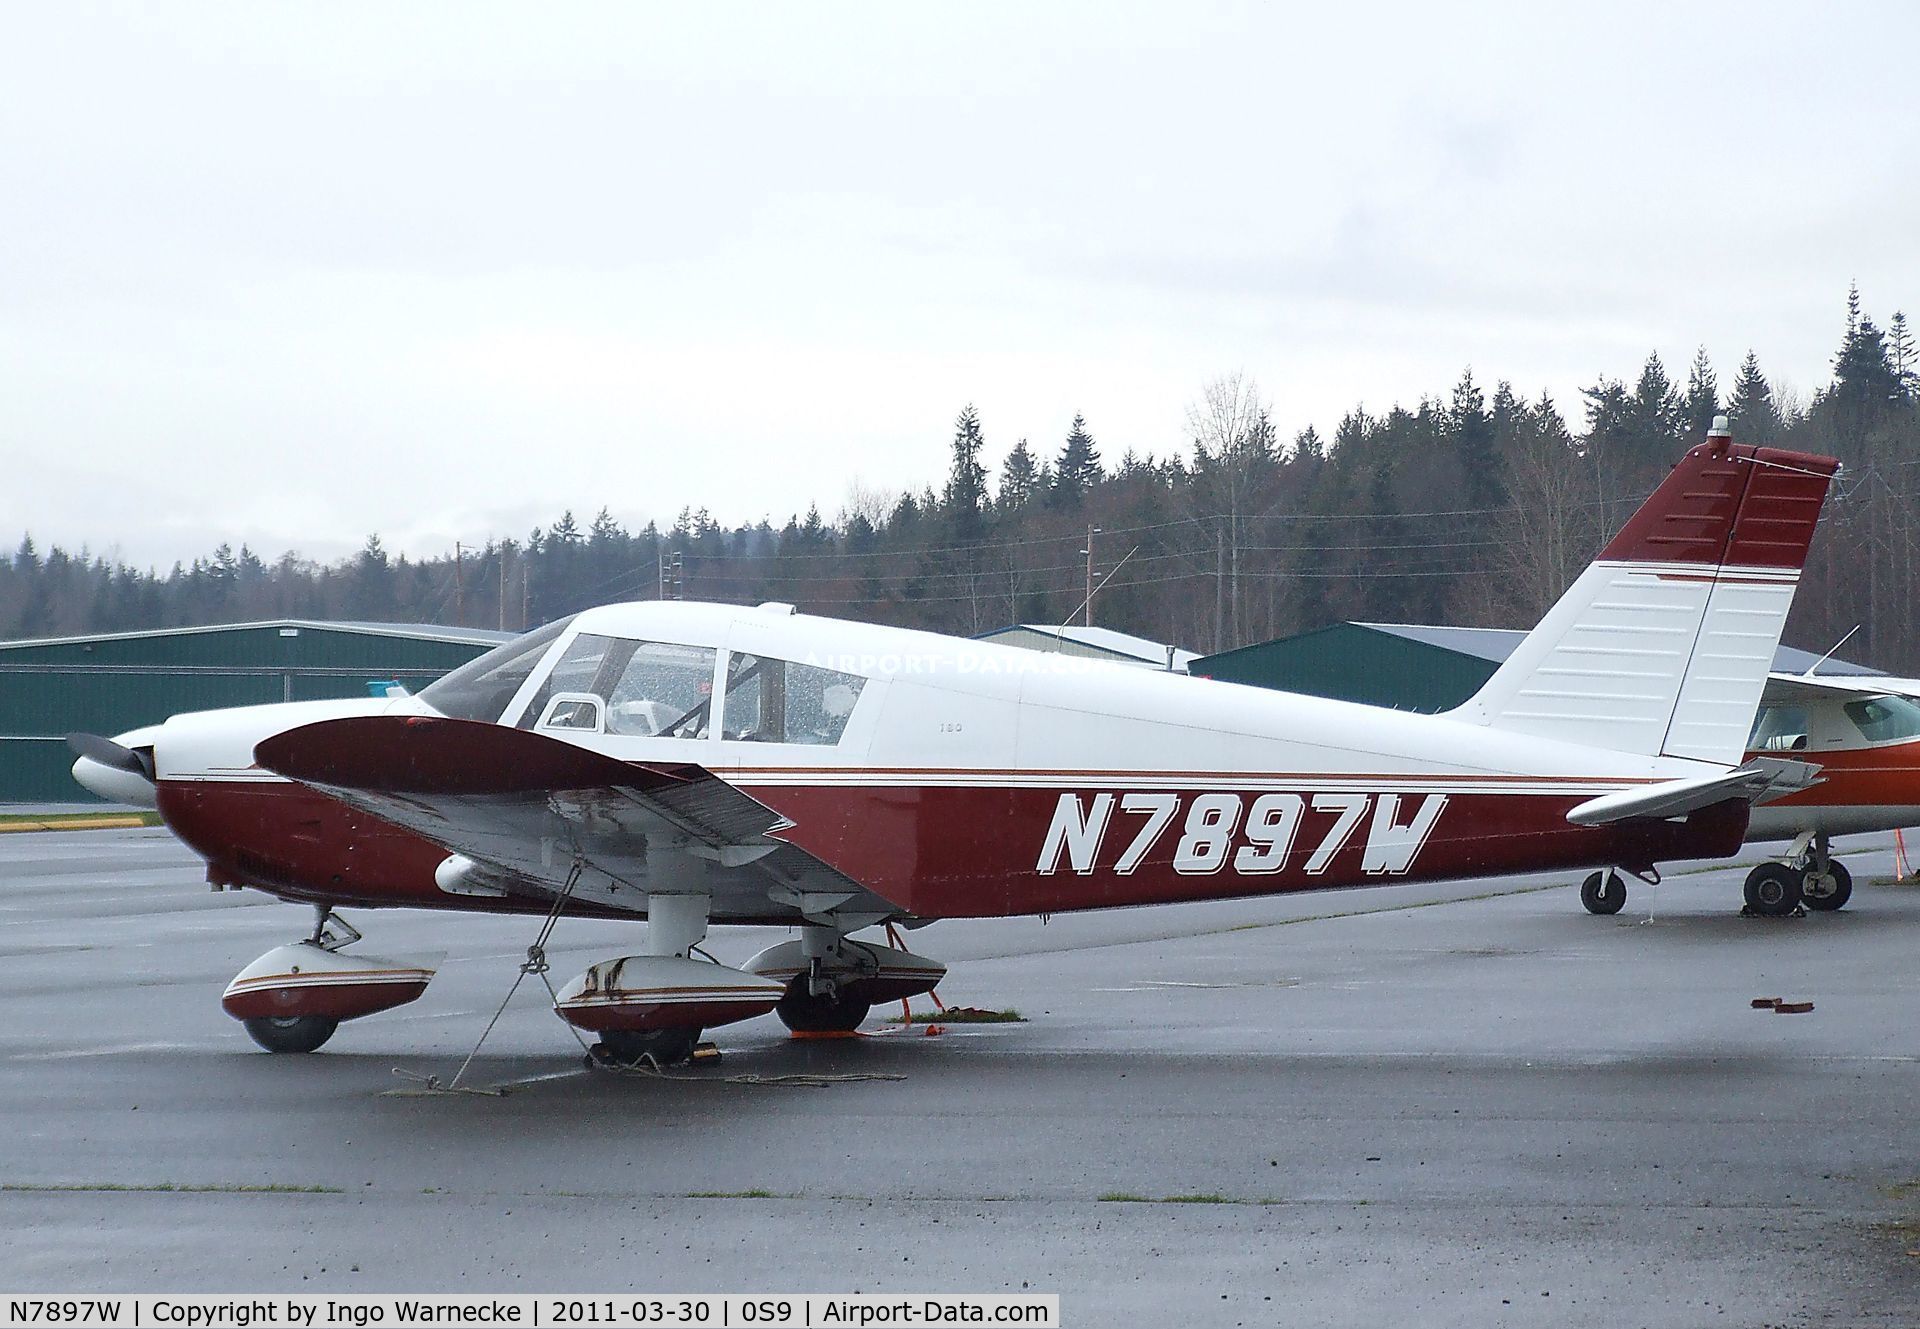 N7897W, 1964 Piper PA-28-180 C/N 28-1925, Piper PA-28-180 Cherokee at Jefferson County Intl Airport, Port Townsend WA